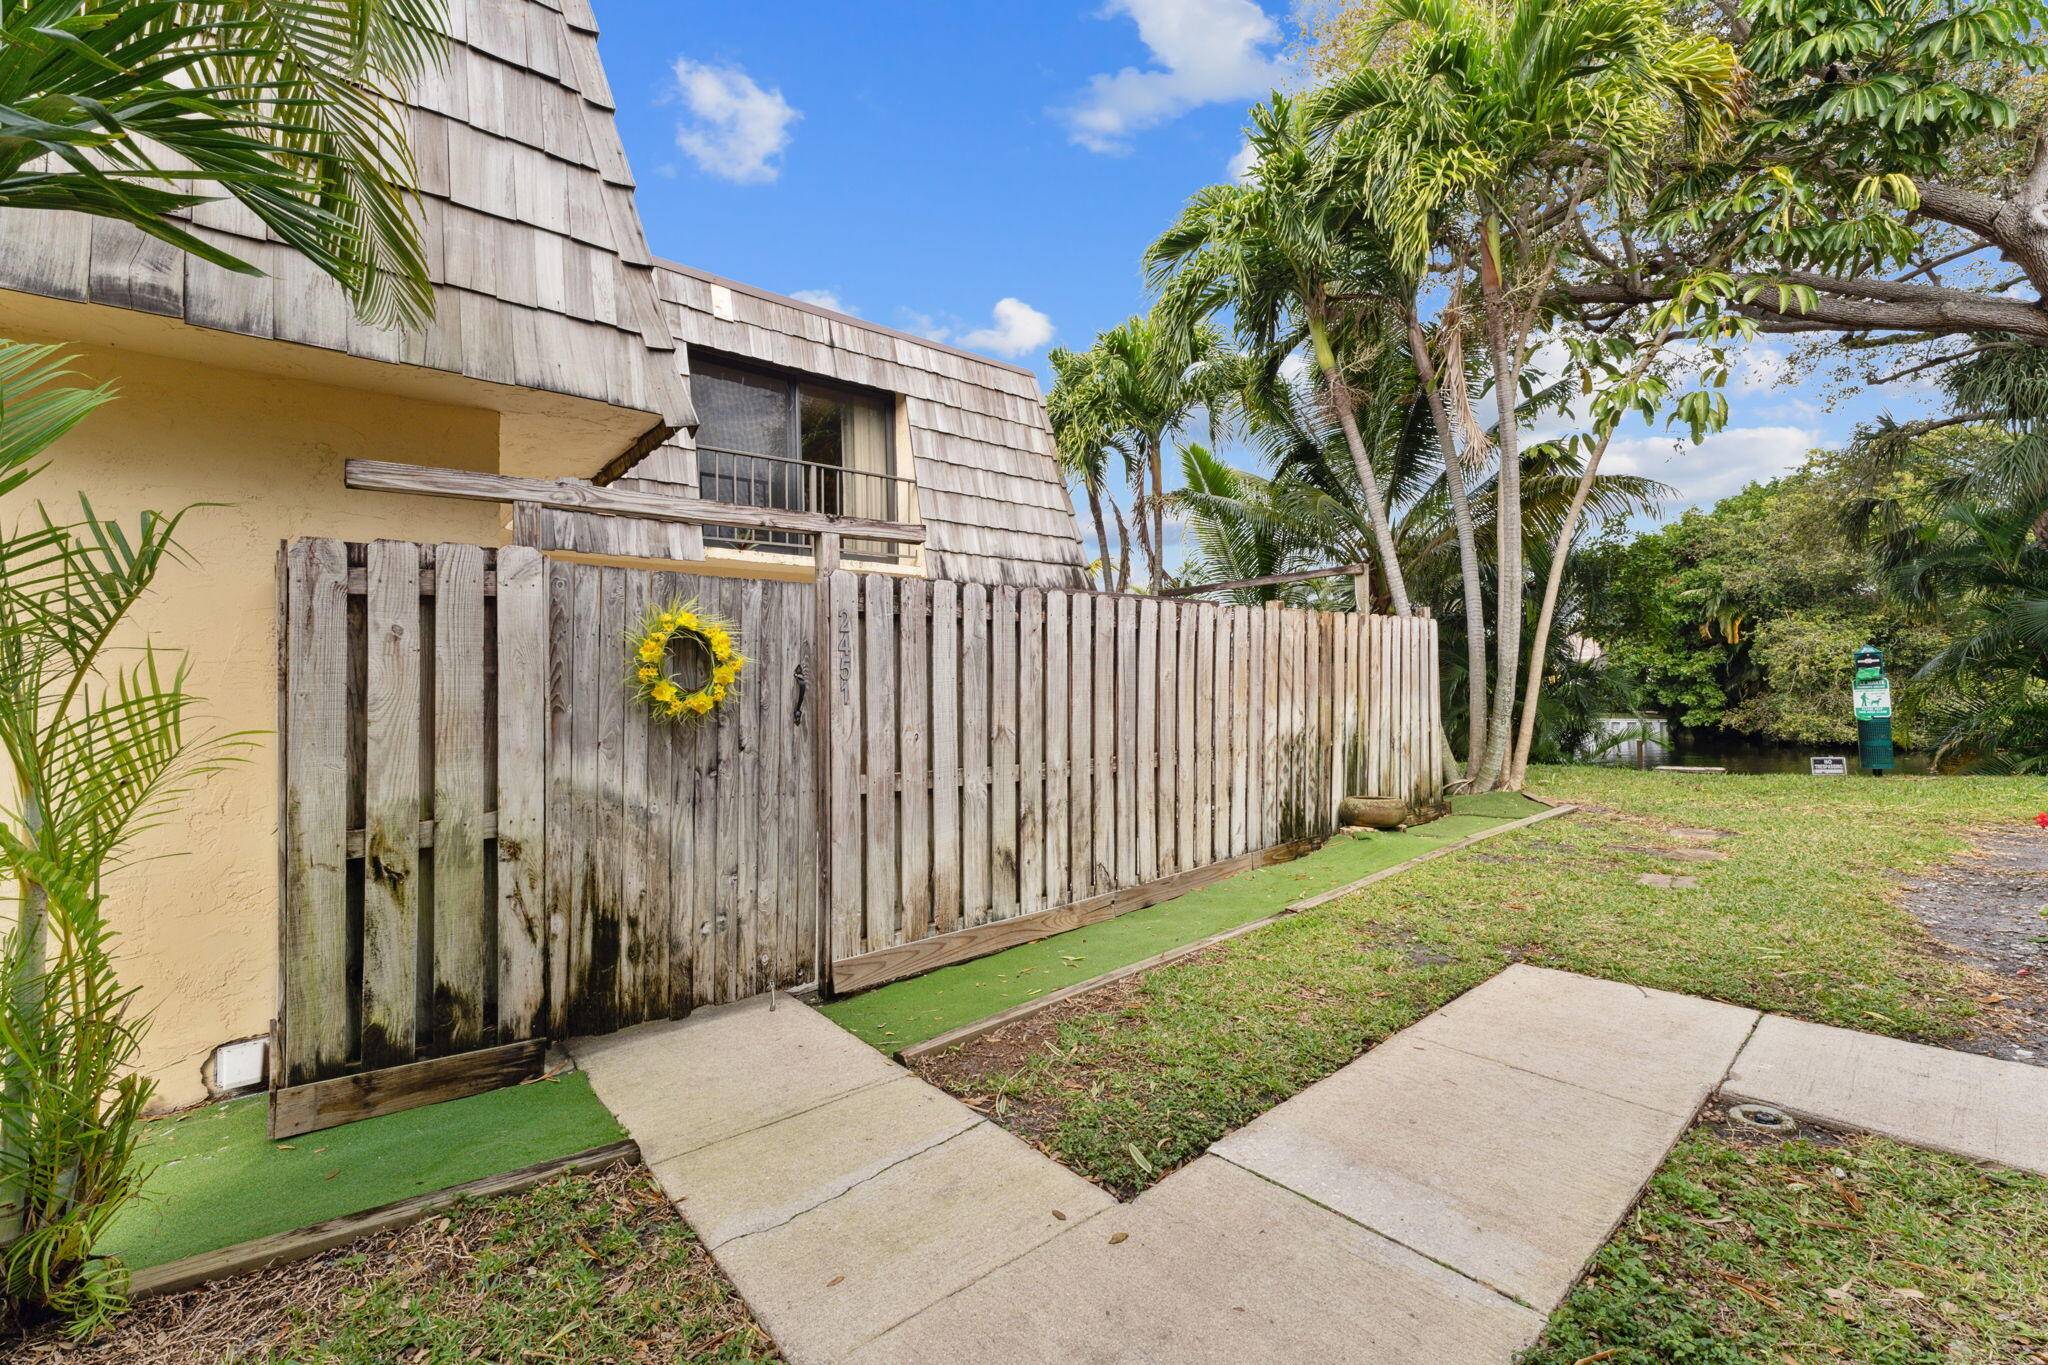 Discover the ultimate value in Lake Worth with this exceptional community offering.